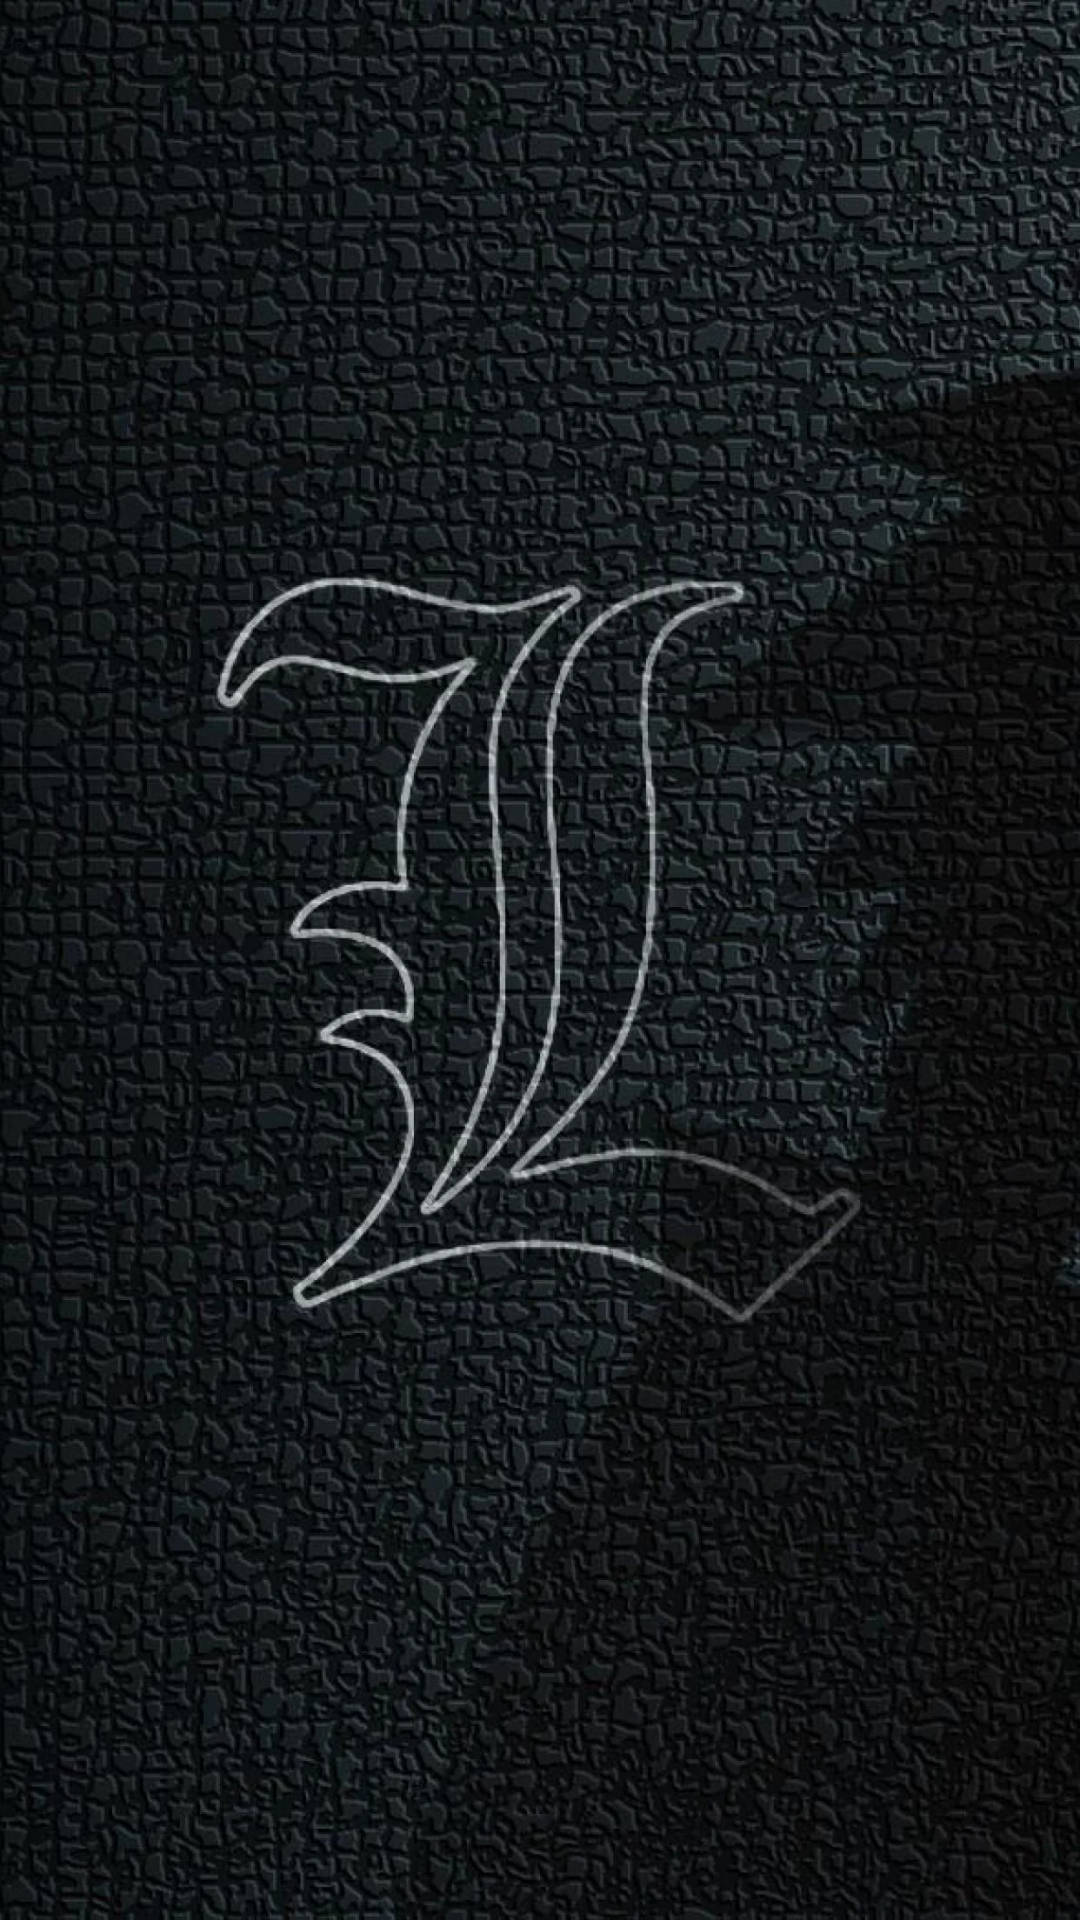 Lawliet’s Symbol On Death Note Iphone Background